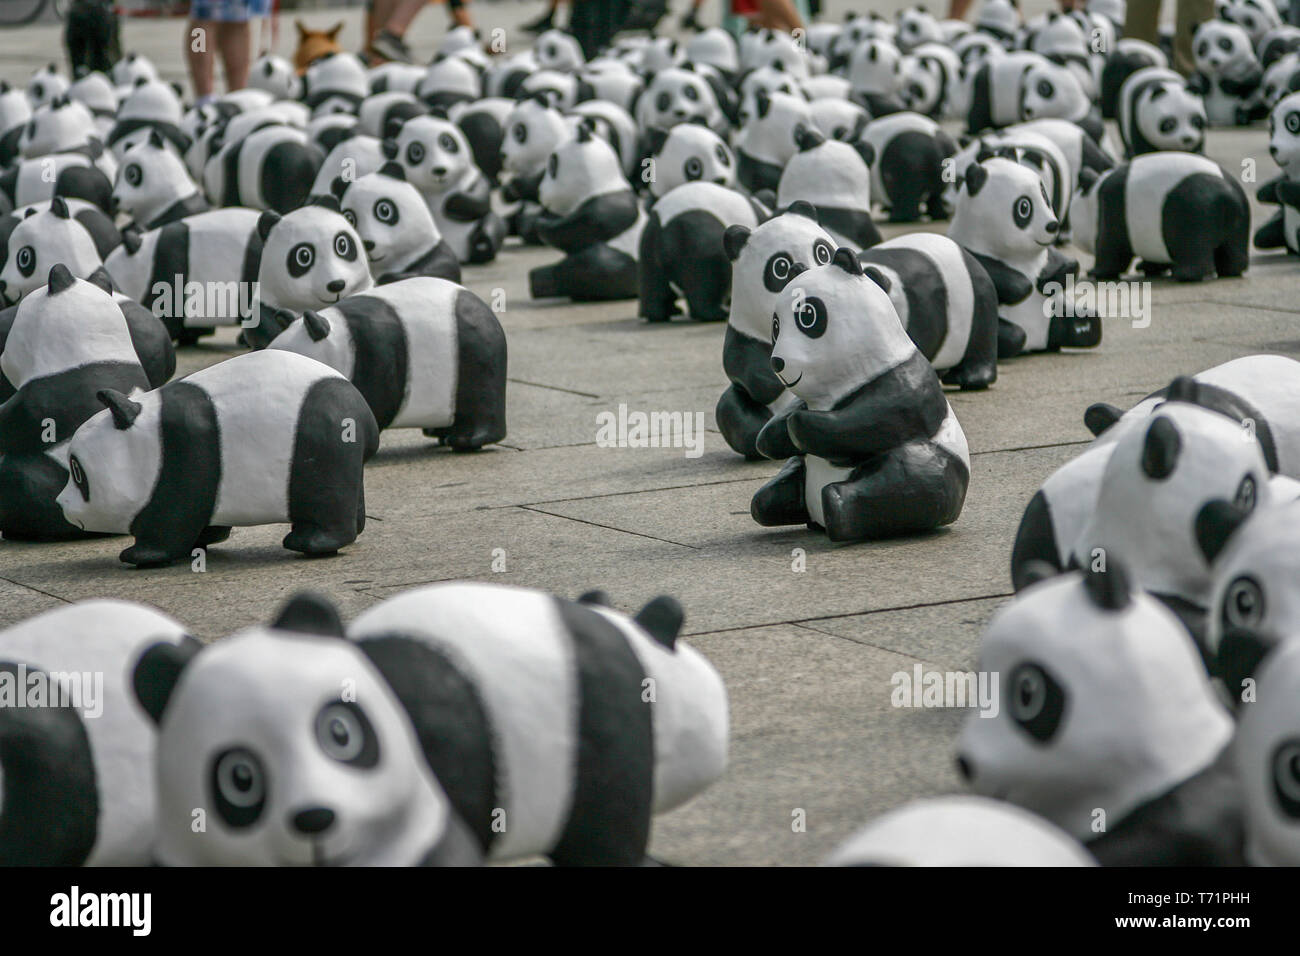 Berlin, Germany, August 6, 2013 - The WWF celebrates its 50th anniversary with a panda tour. 1600 sculptures of Pandabaeren were set up in front of Berlin Central Station. These correspond to the actually still living number of Pandabaeren in liberty. Stock Photo